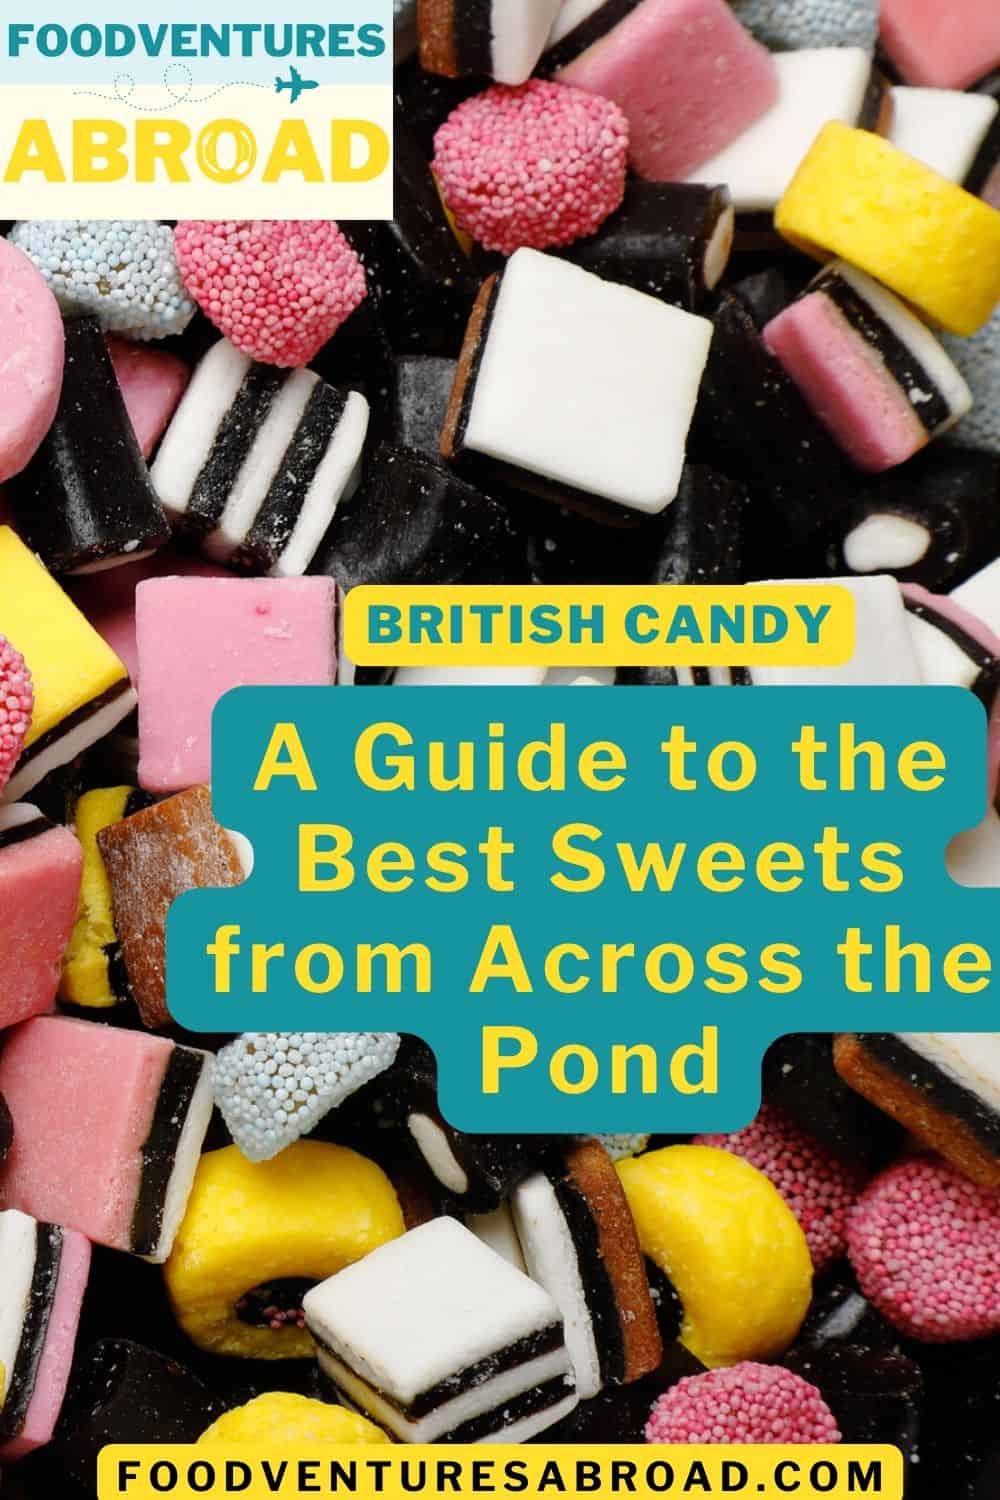 A guide to the best British candy from across the pond.